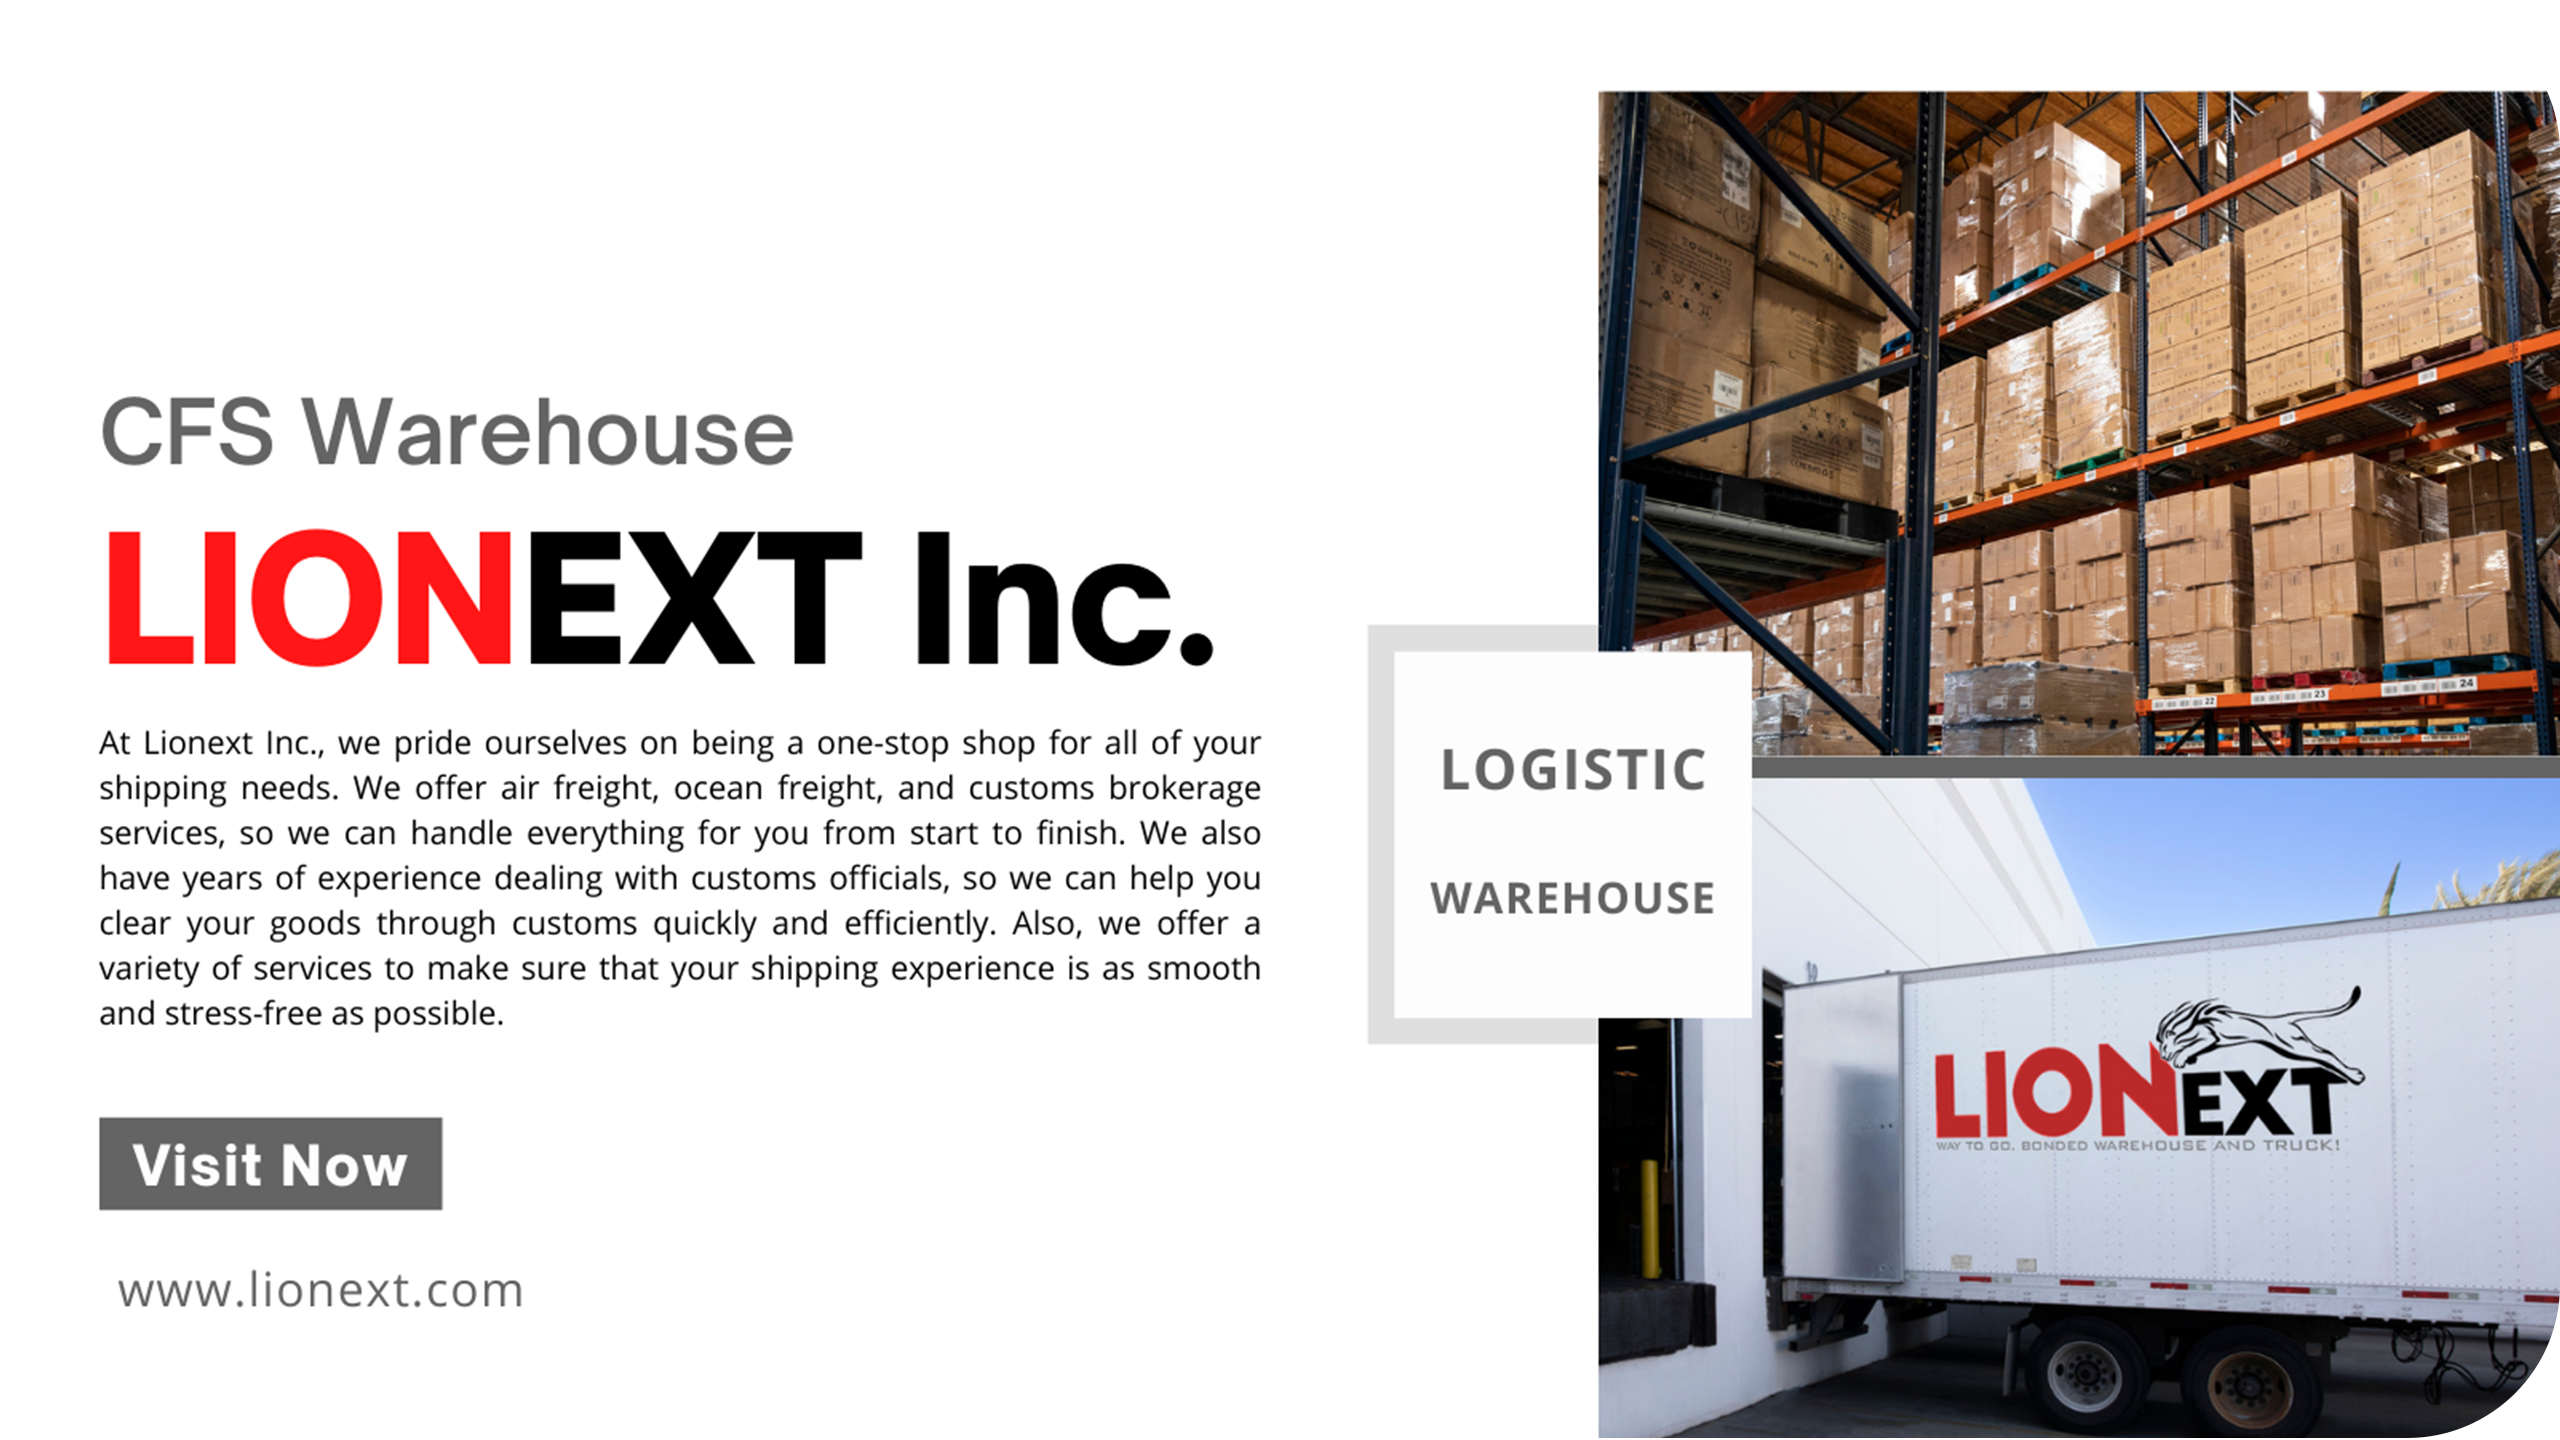 Lionext Inc. Contract Logistics Services – Vital for Businesses in the US